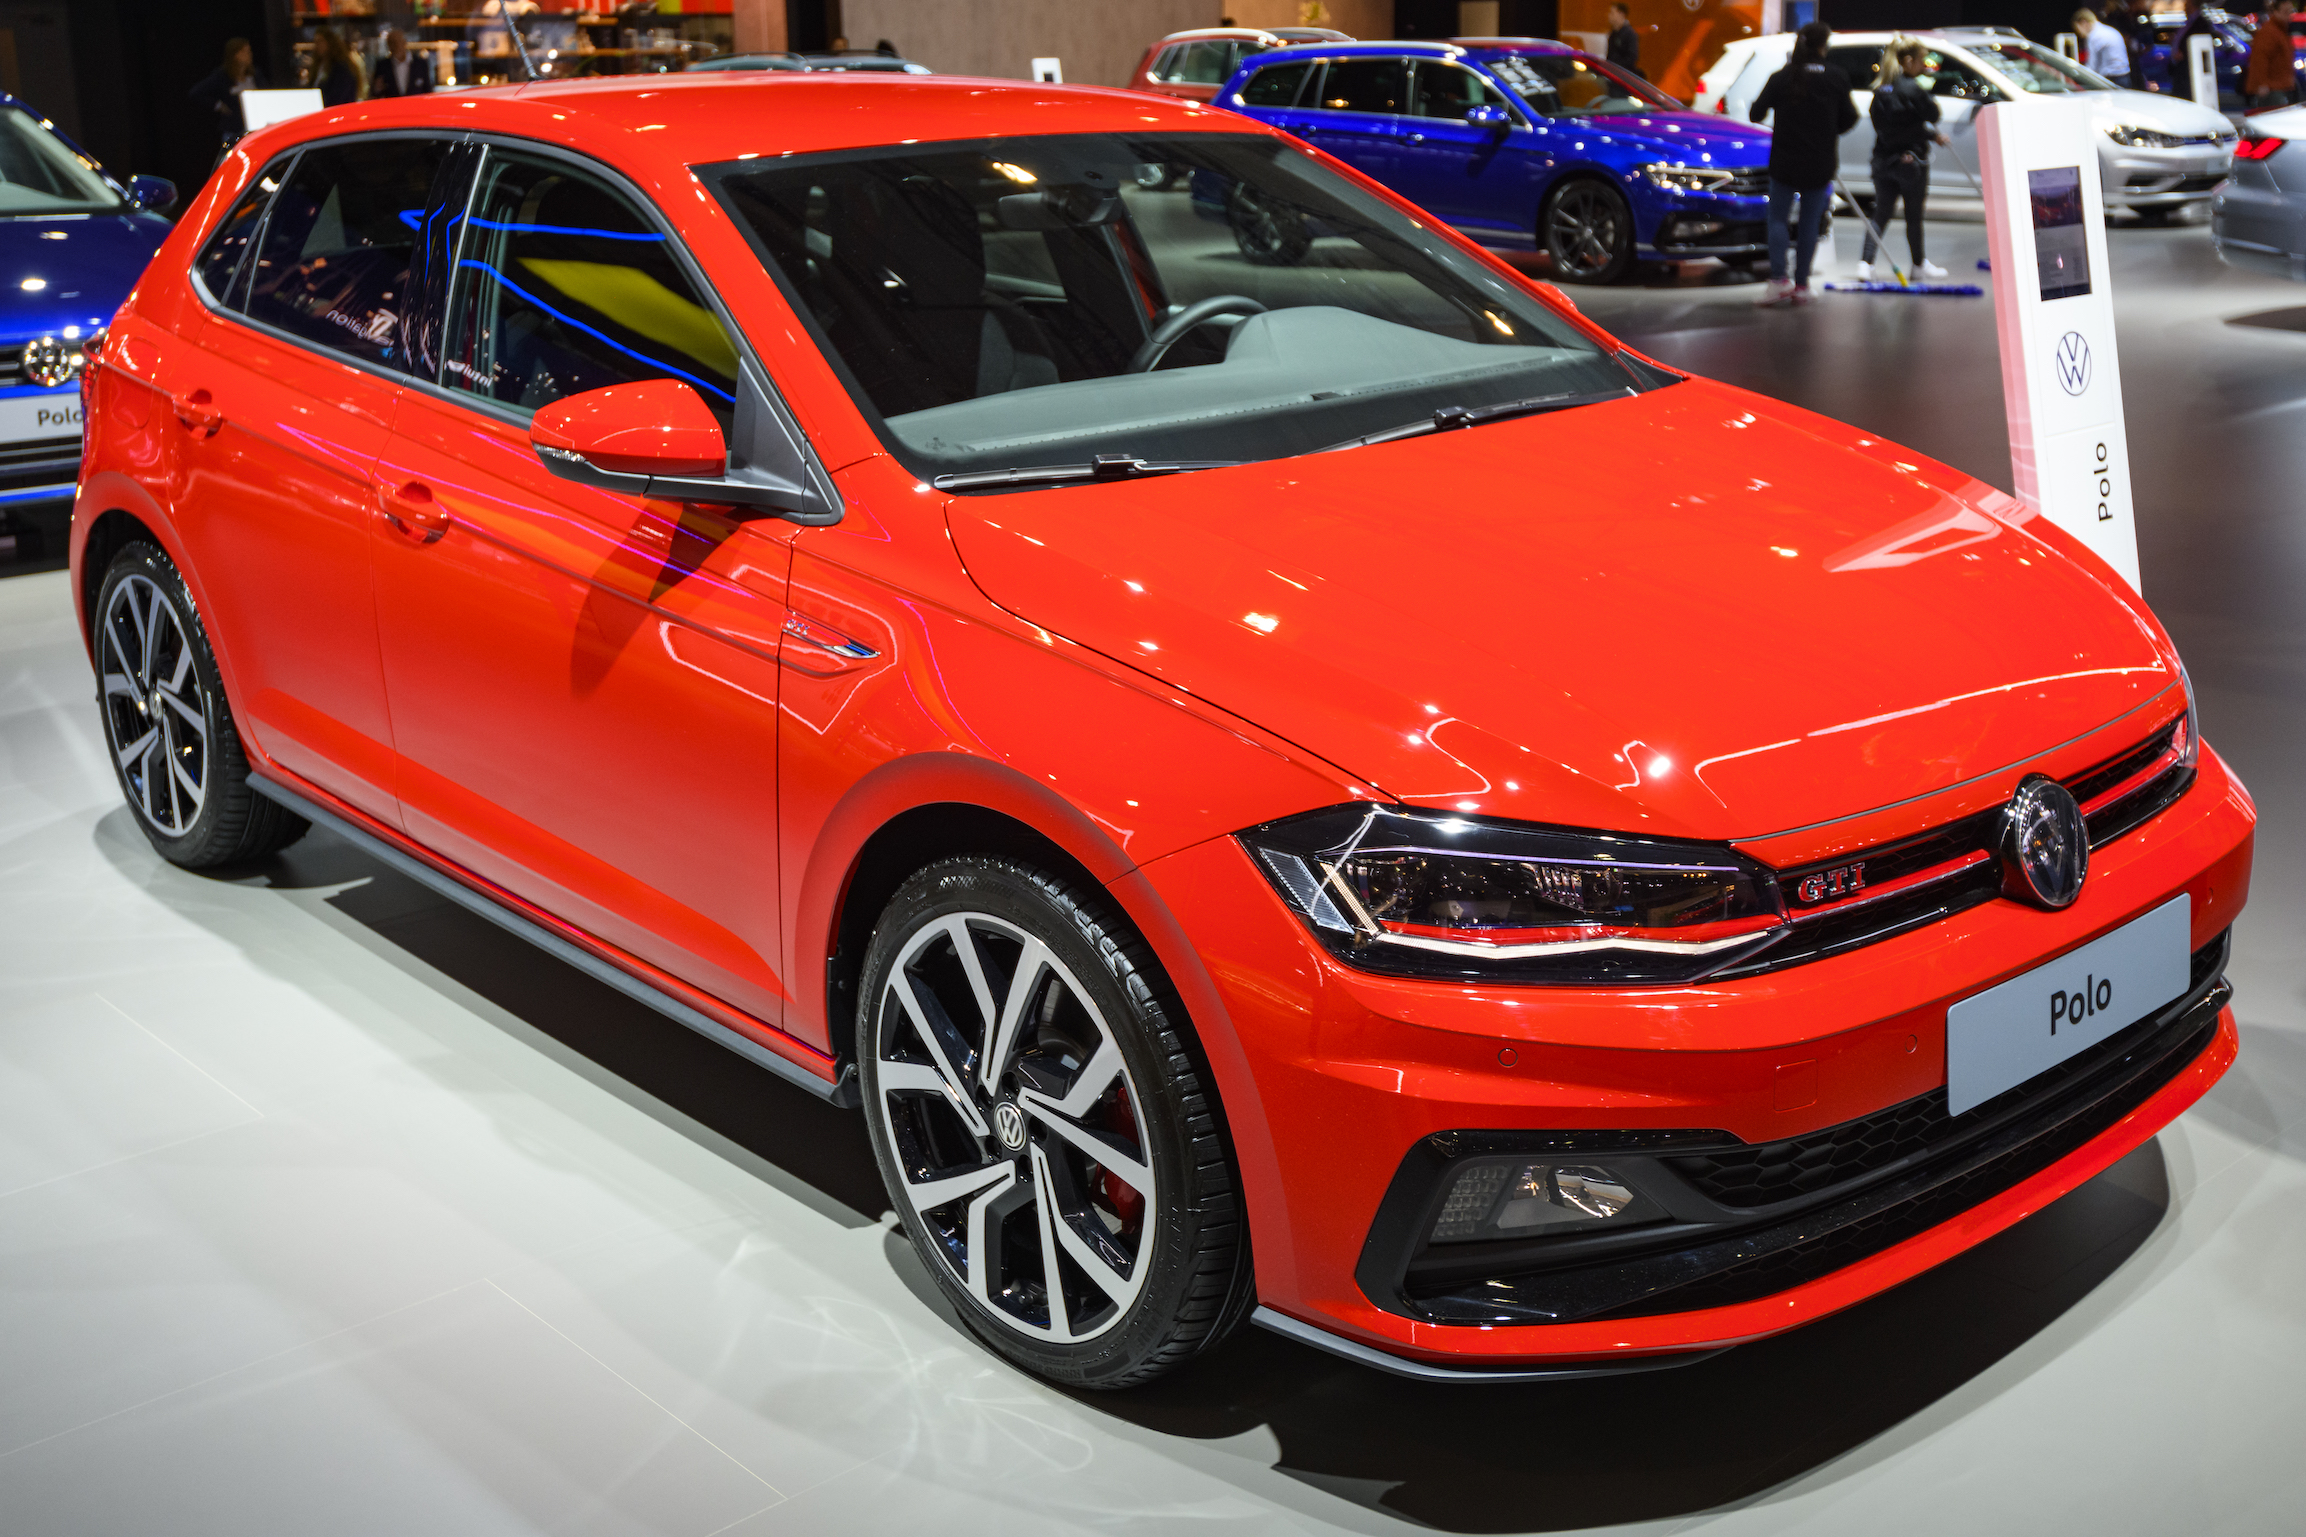 Volkswagen Polo GTI compact hatckbac car on display at Brussels Expo